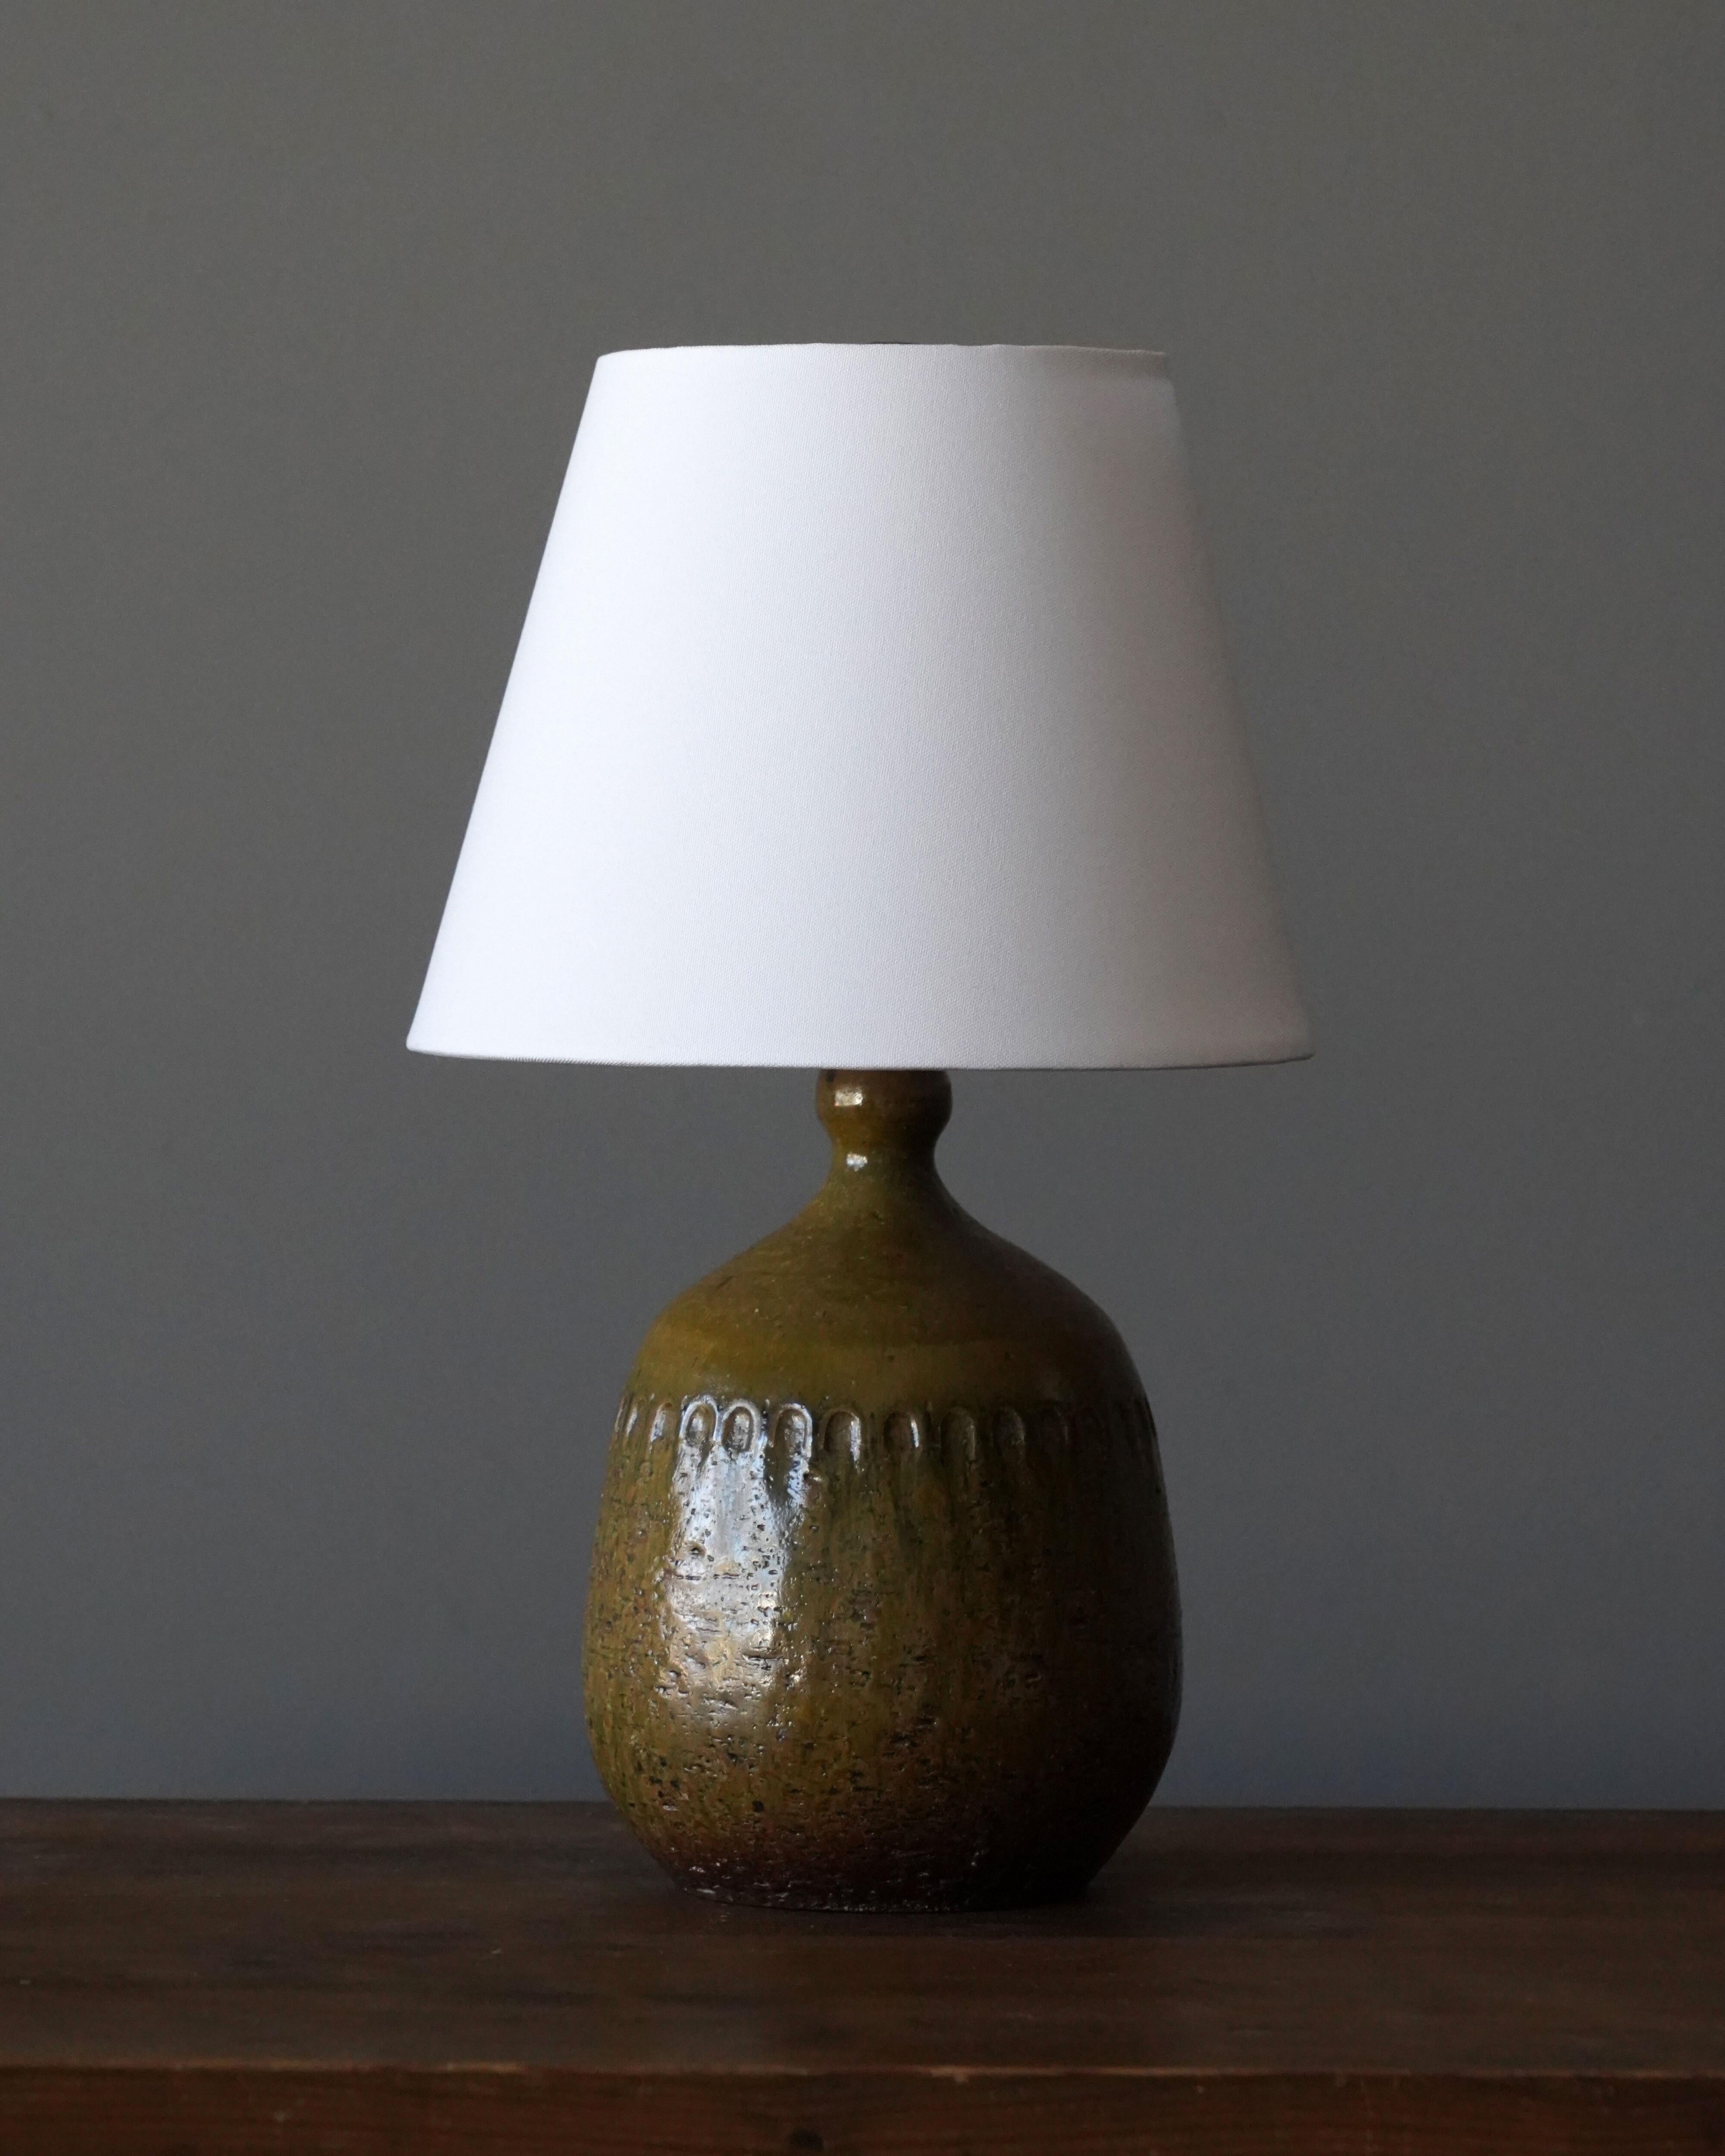 A small organic table lamp. Produced by Yngve Blixt (1920-1981). Produced in the studio of the artist, signed and dated -65.

In glazed and ornamented stoneware.

Sold without lampshade. Stated dimensions excluding lampshade.

Other designers of the